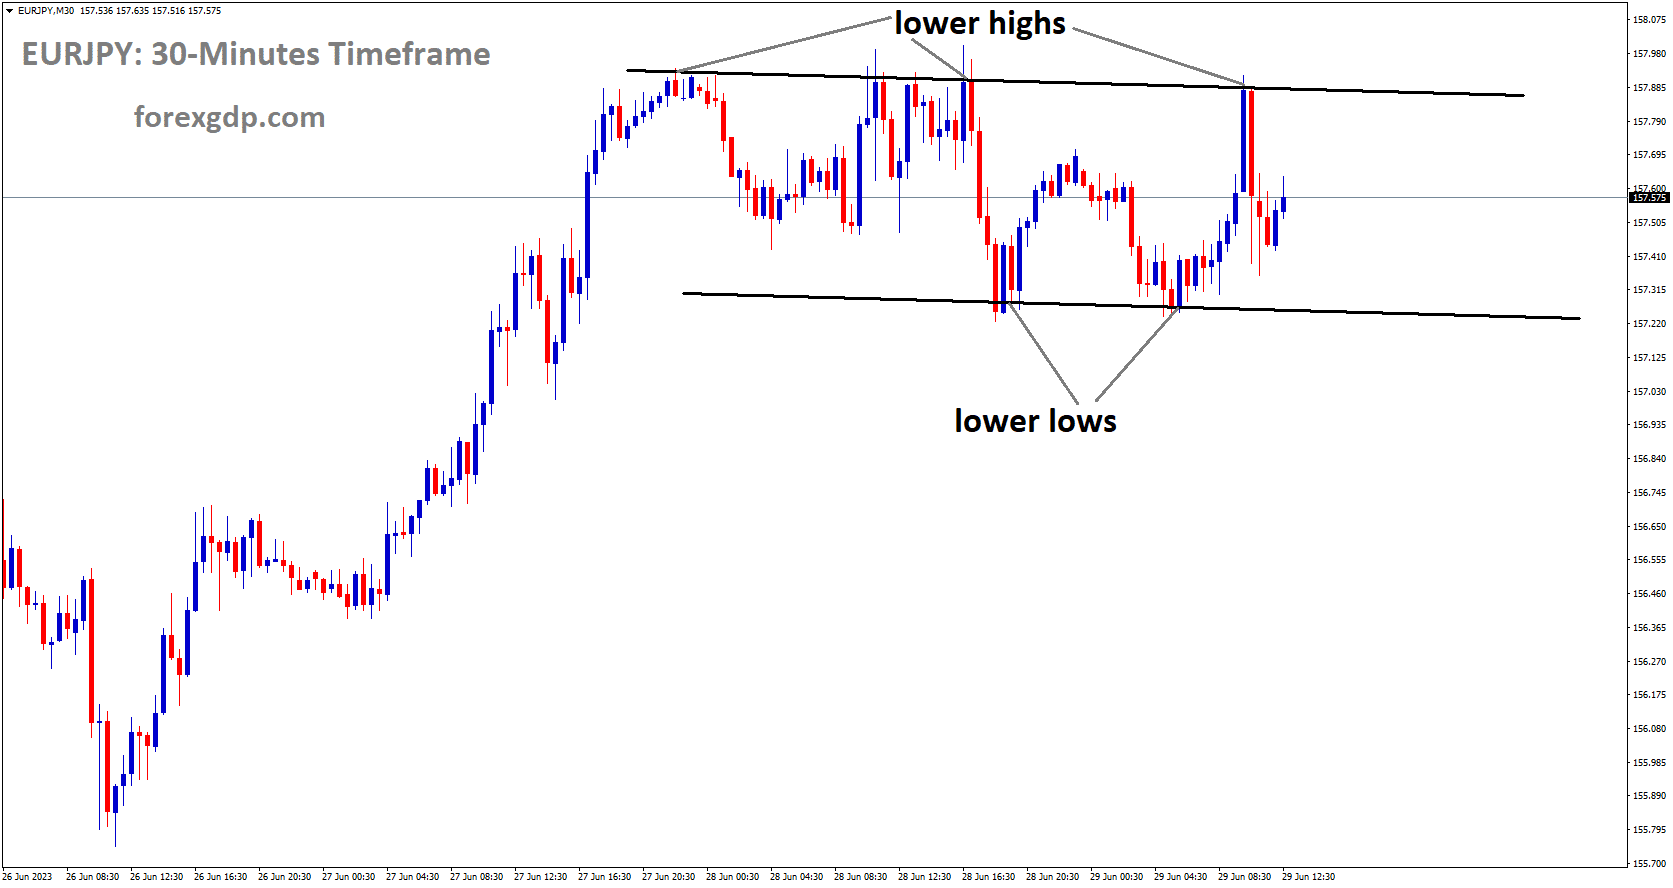 EURJPY is moving an Descending channel and the market has fallen from the lower high area of the channel.